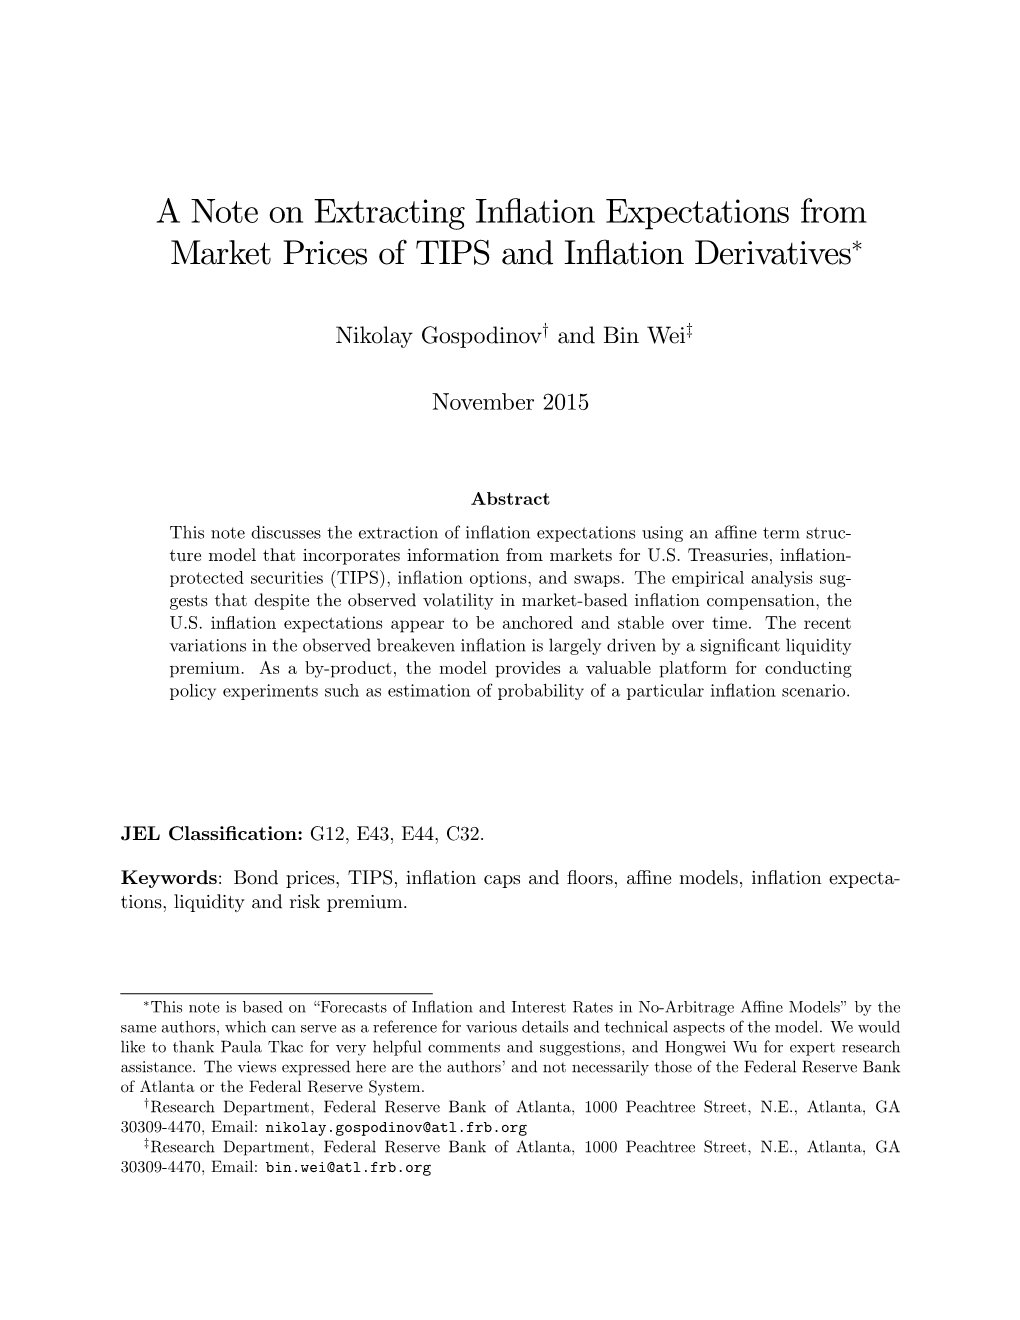 A Note on Extracting Inflation Expectations from Market Prices Of